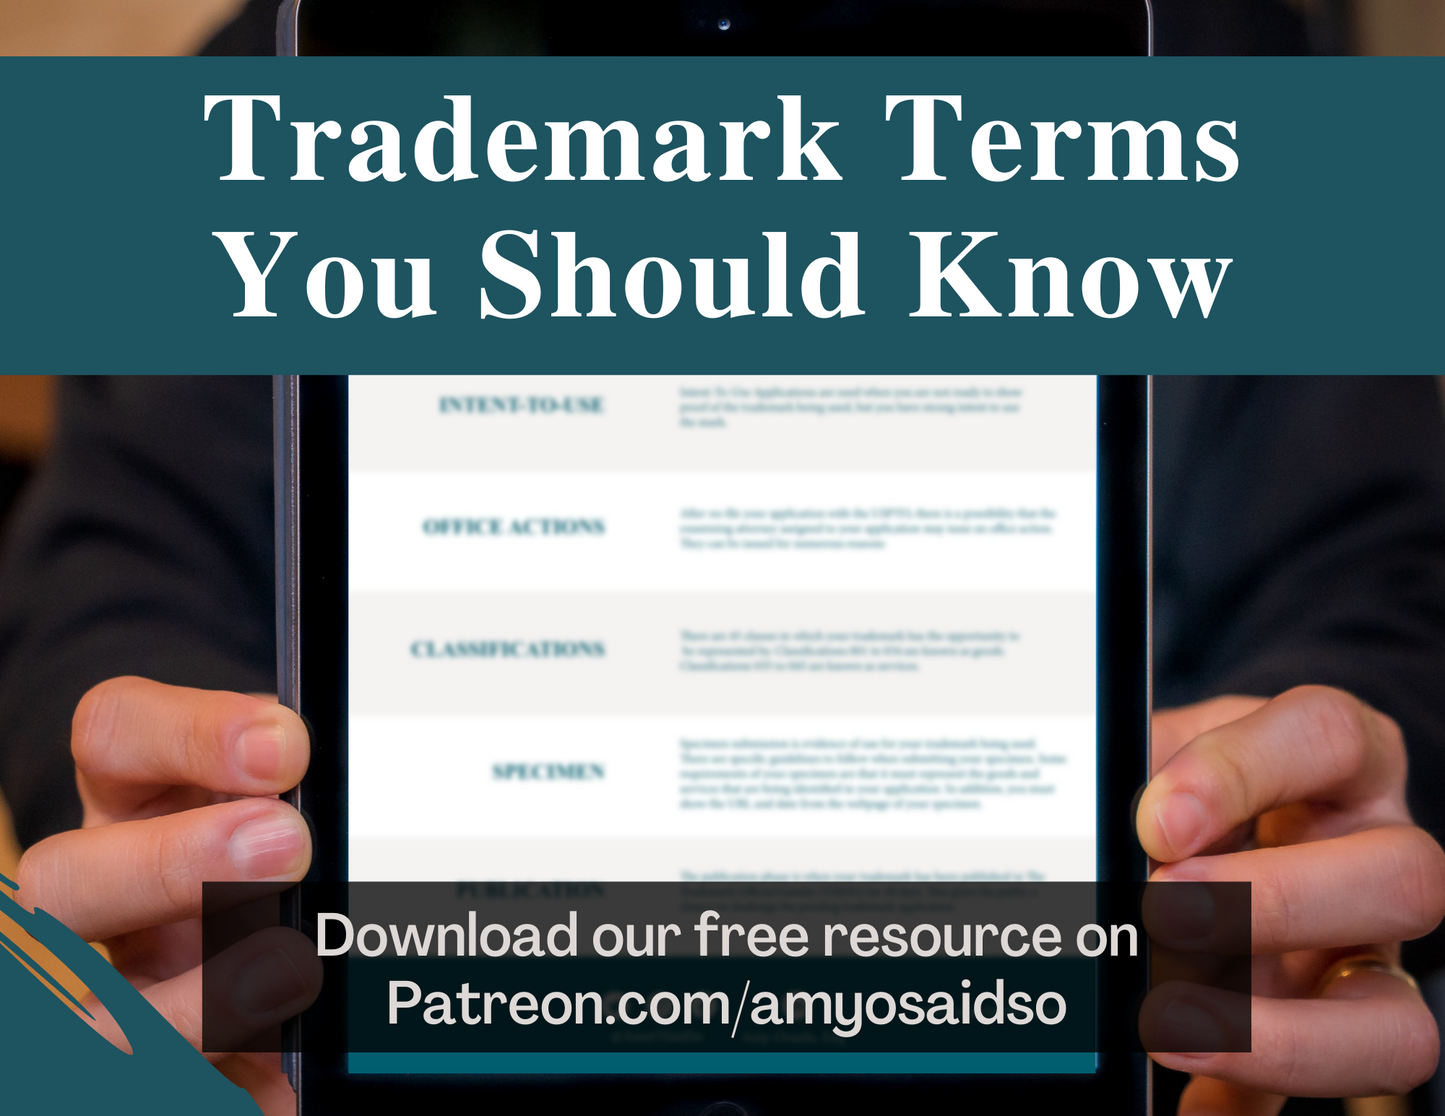 "Trademark Terms You Should Know" Digital Download